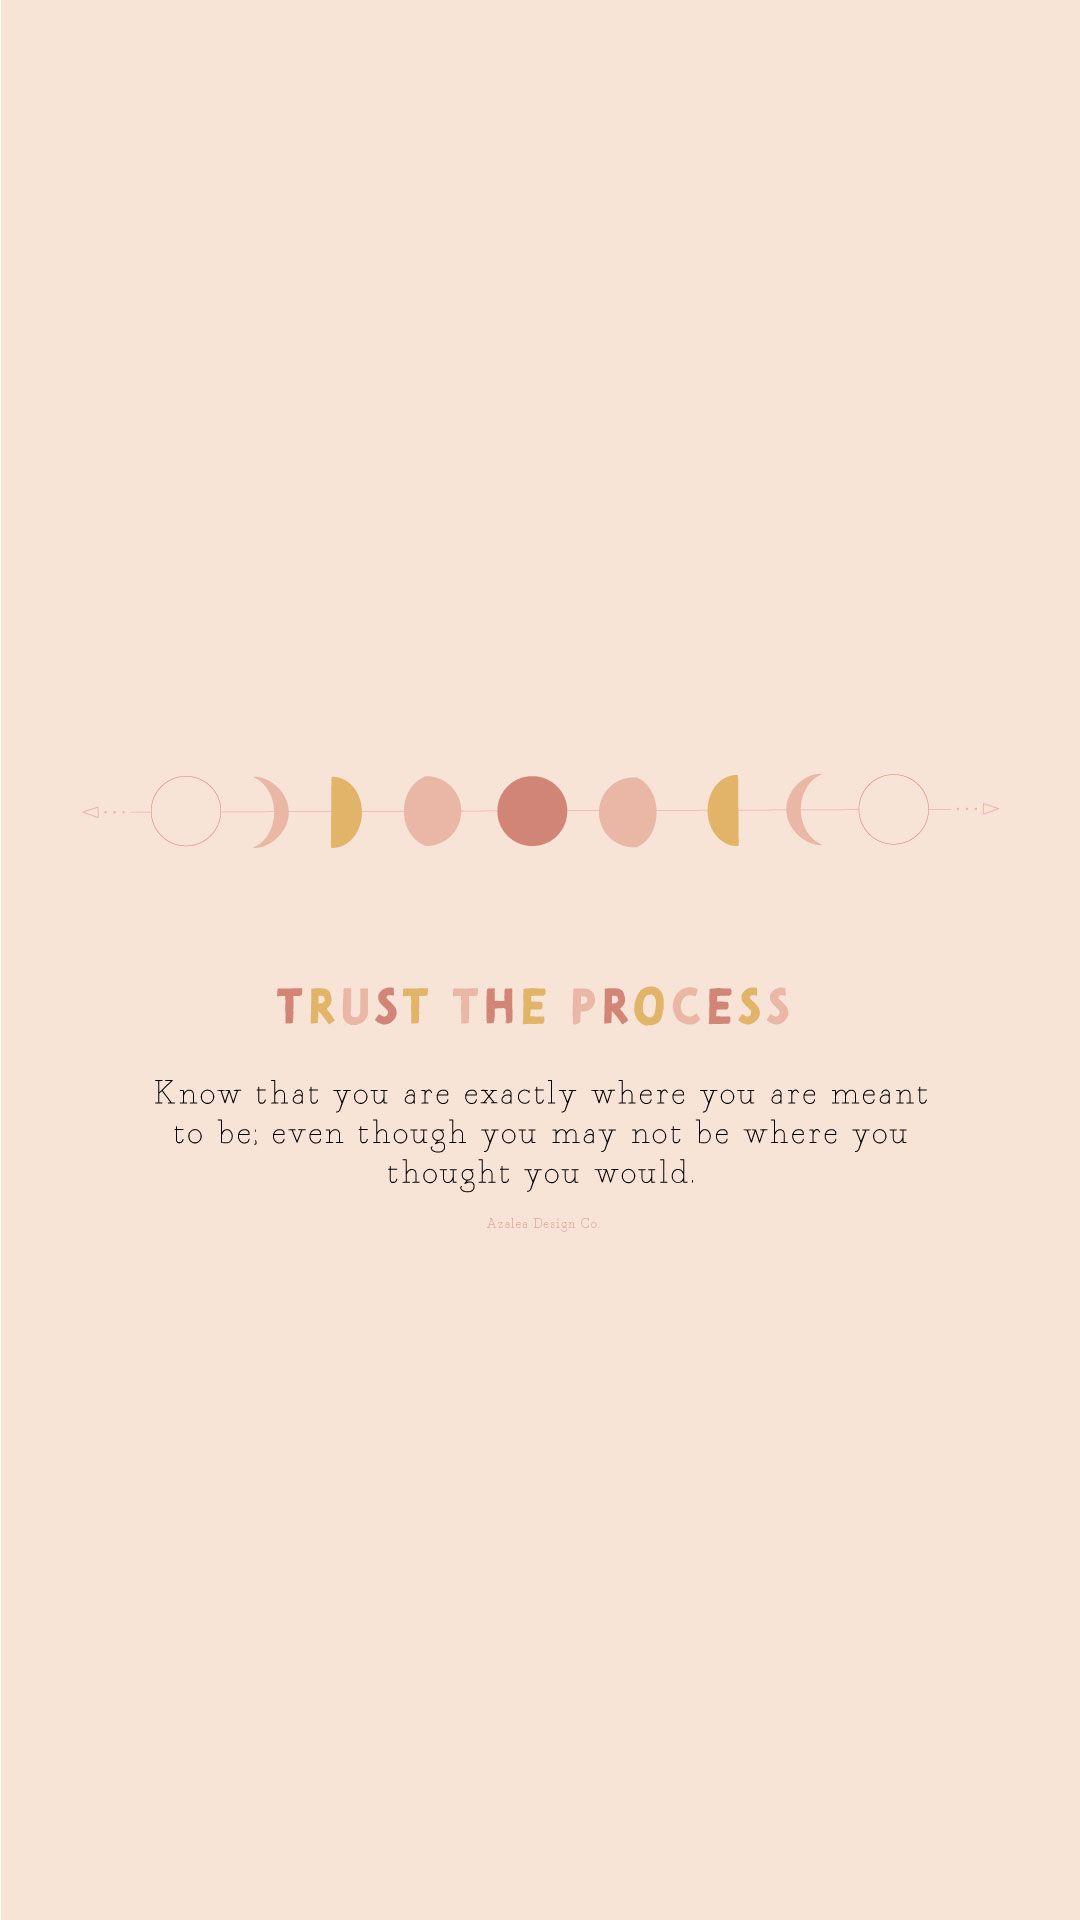 Trust the process phone wallpaper. Quote aesthetic, Motivational quotes wallpaper, iPhone wallpaper quotes inspirational